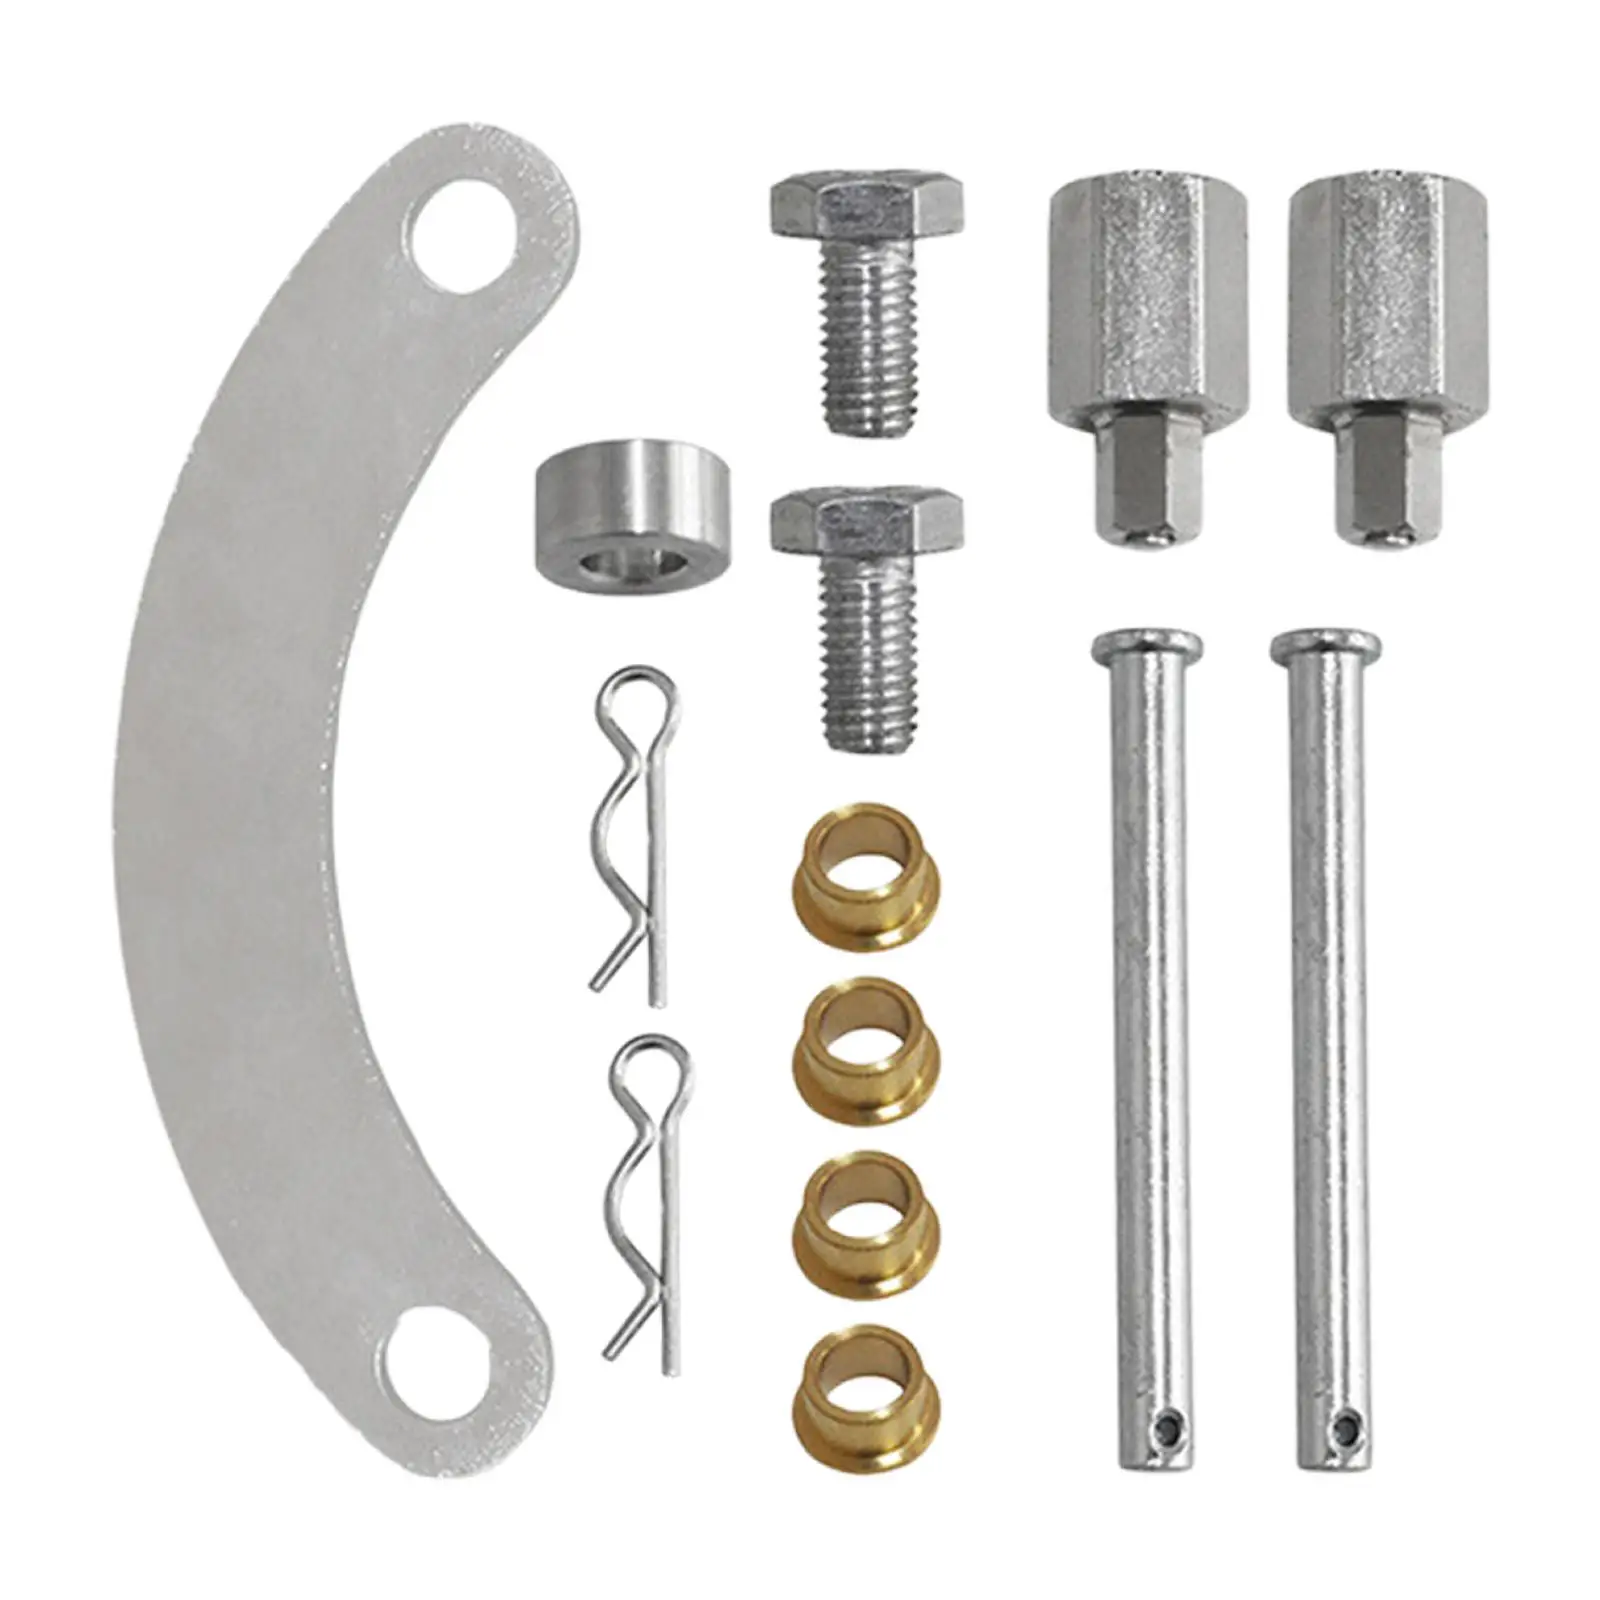 cam Gear Lock set Direct Replaces for Subaru WRX Sti Fxt Lgt Mounting Hardware Durable Easy to Install Spare Parts